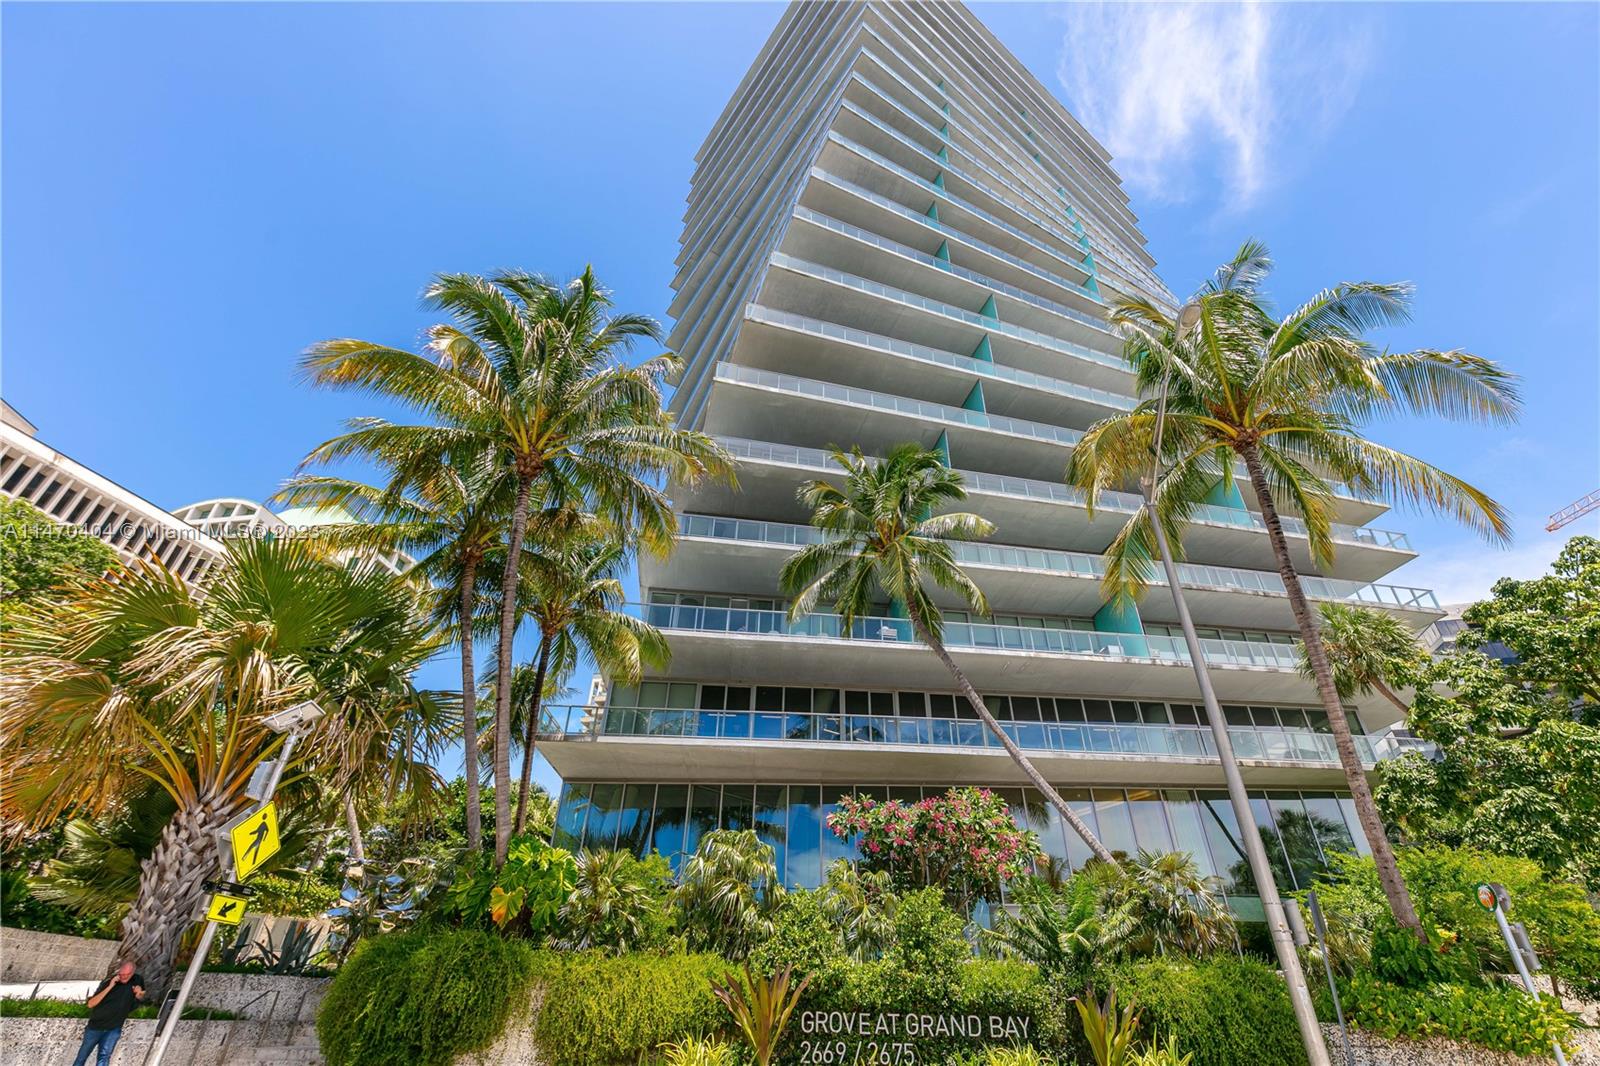 2675 S Bayshore Dr 602S, Coconut Grove, Florida 33133, 4 Bedrooms Bedrooms, ,5 BathroomsBathrooms,Residential,For Sale,2675 S Bayshore Dr 602S,A11470404